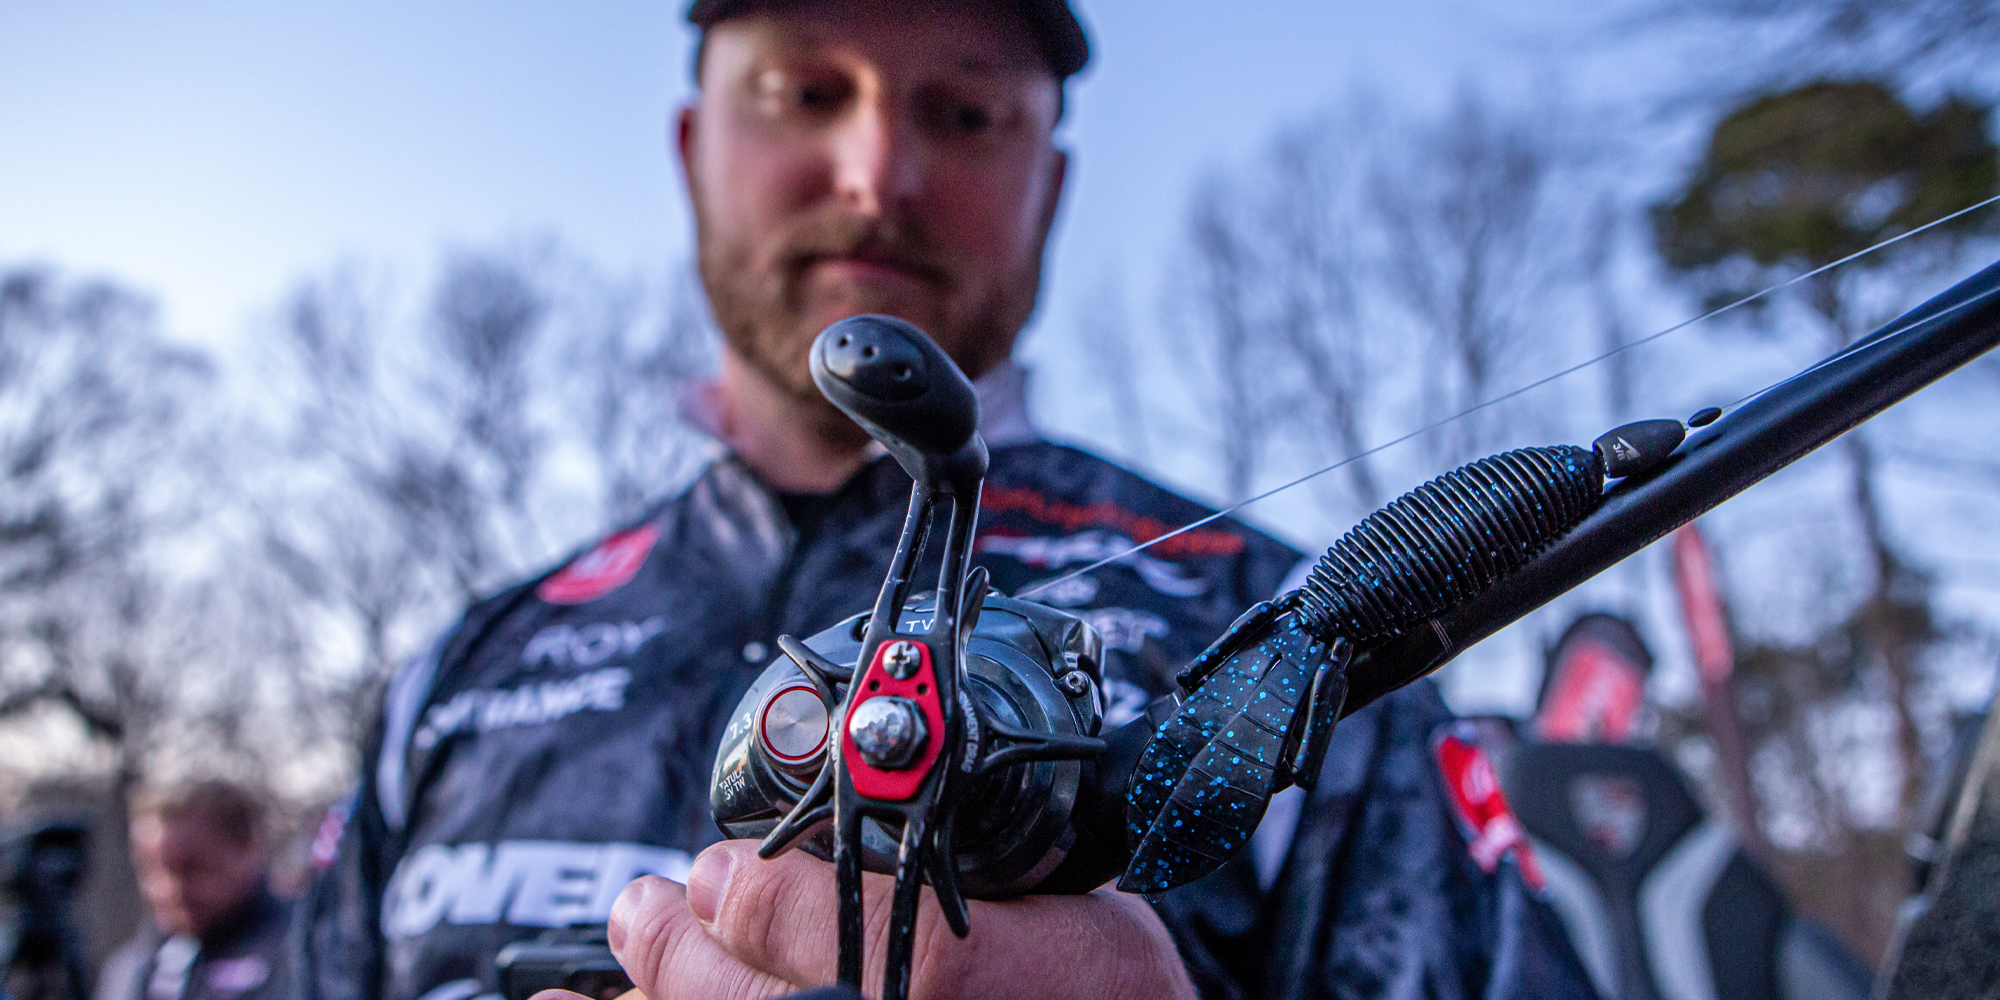 TOP 10 BAITS & PATTERNS: Flipping, Pitching Dominated Bussey Brake